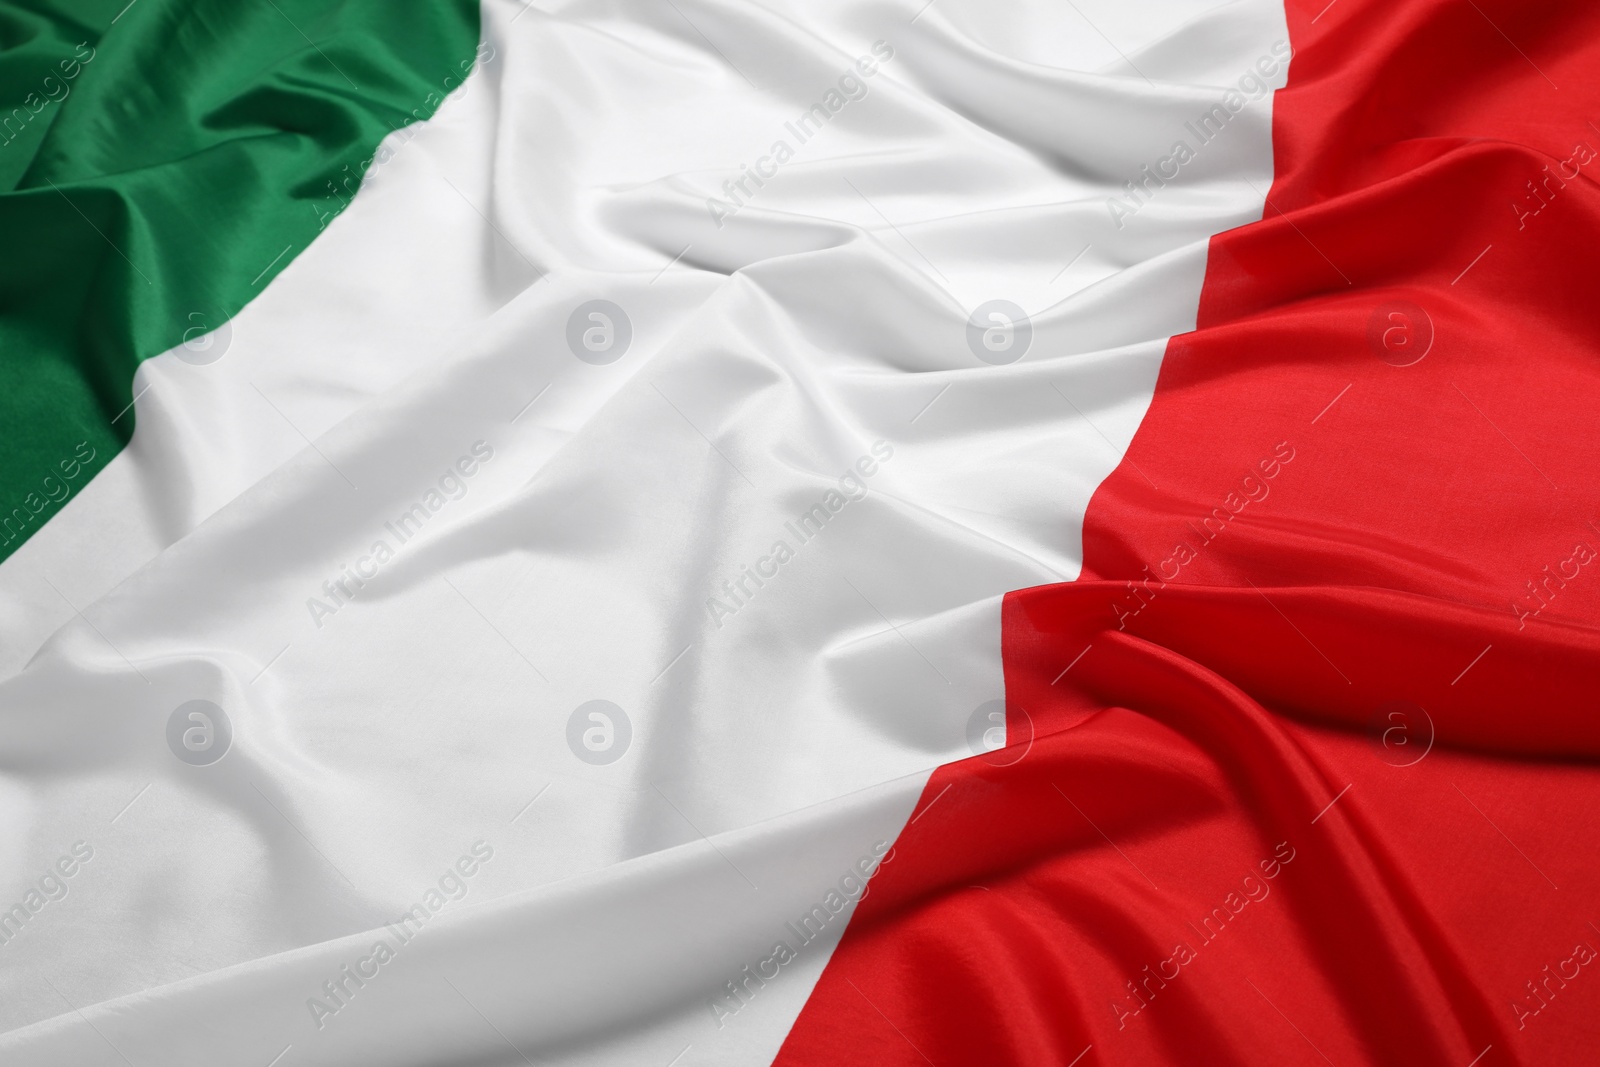 Photo of Flag of Italy as background, closeup. National symbol